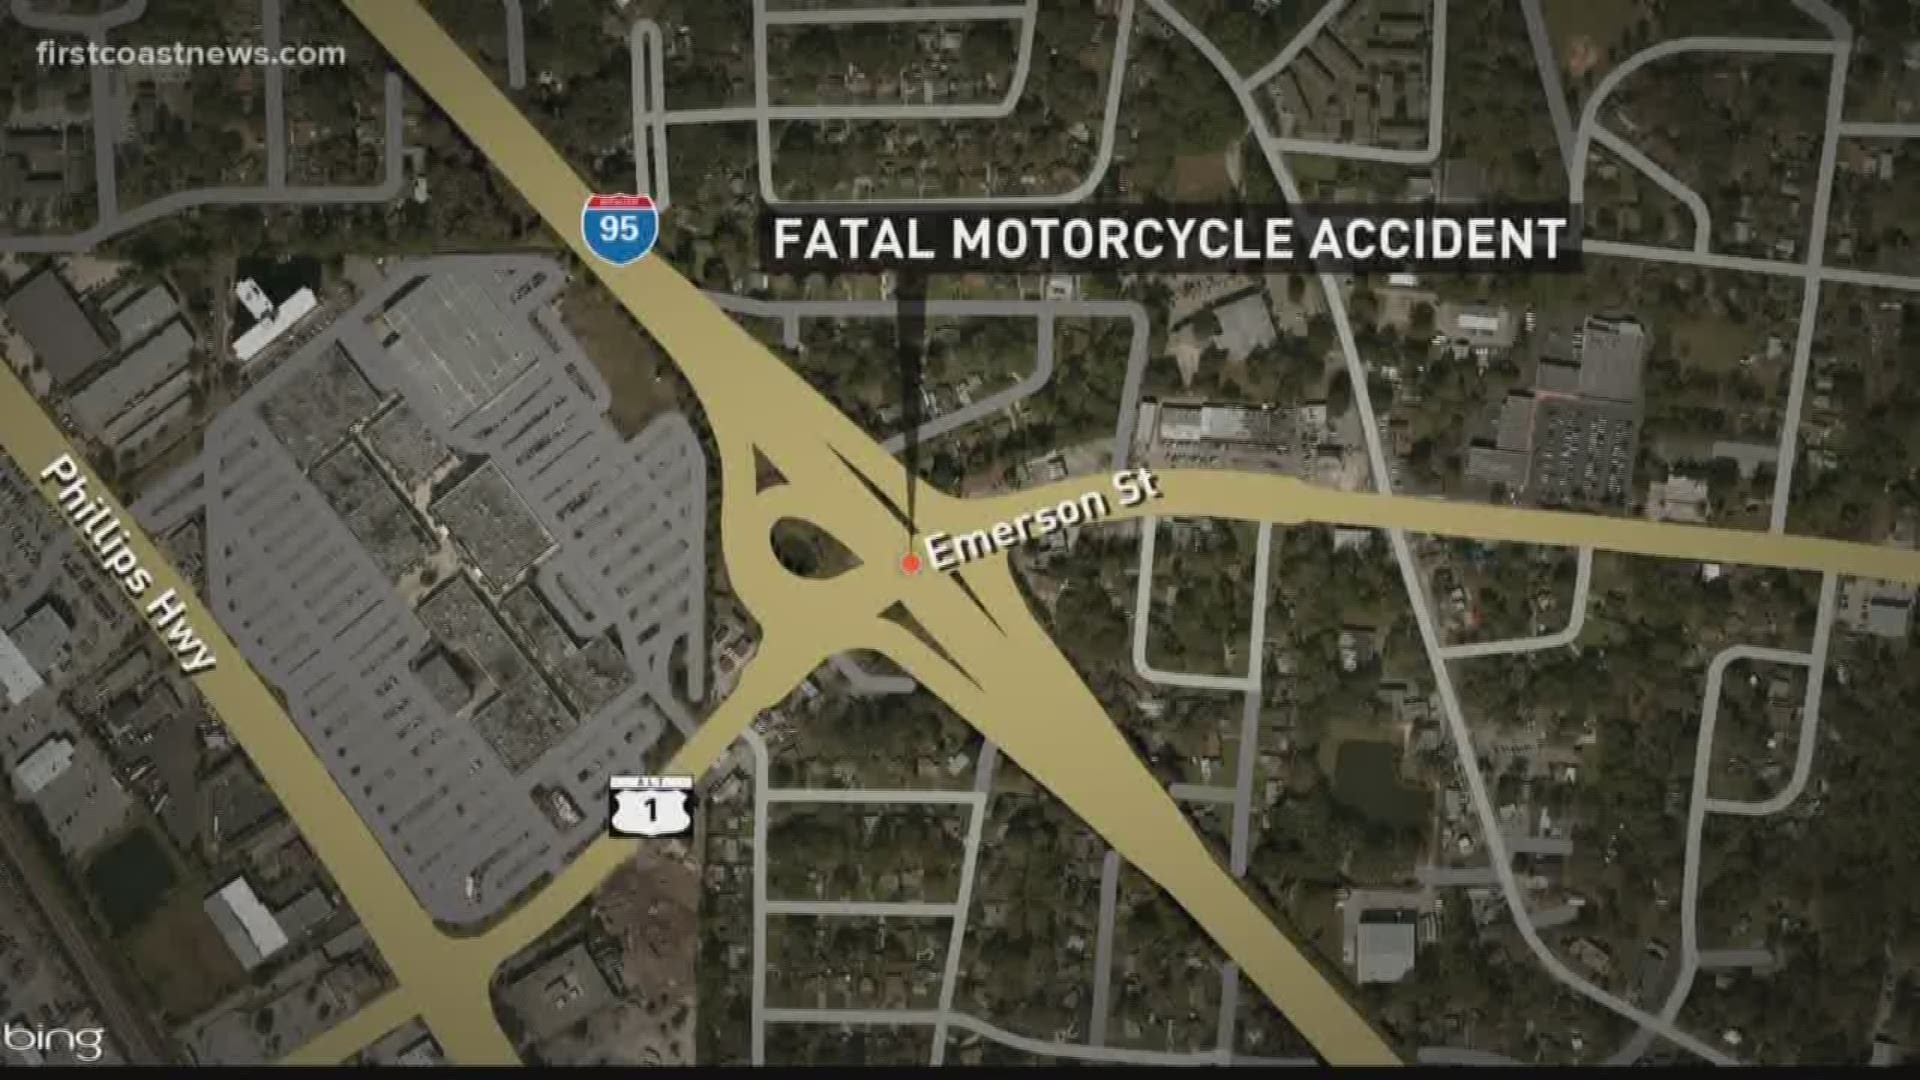 Jacksonville Sheriff's Office has reported a traffic fatality involving a motorcycle and semi-truck overnight on Emerson near the I-95 onramp.